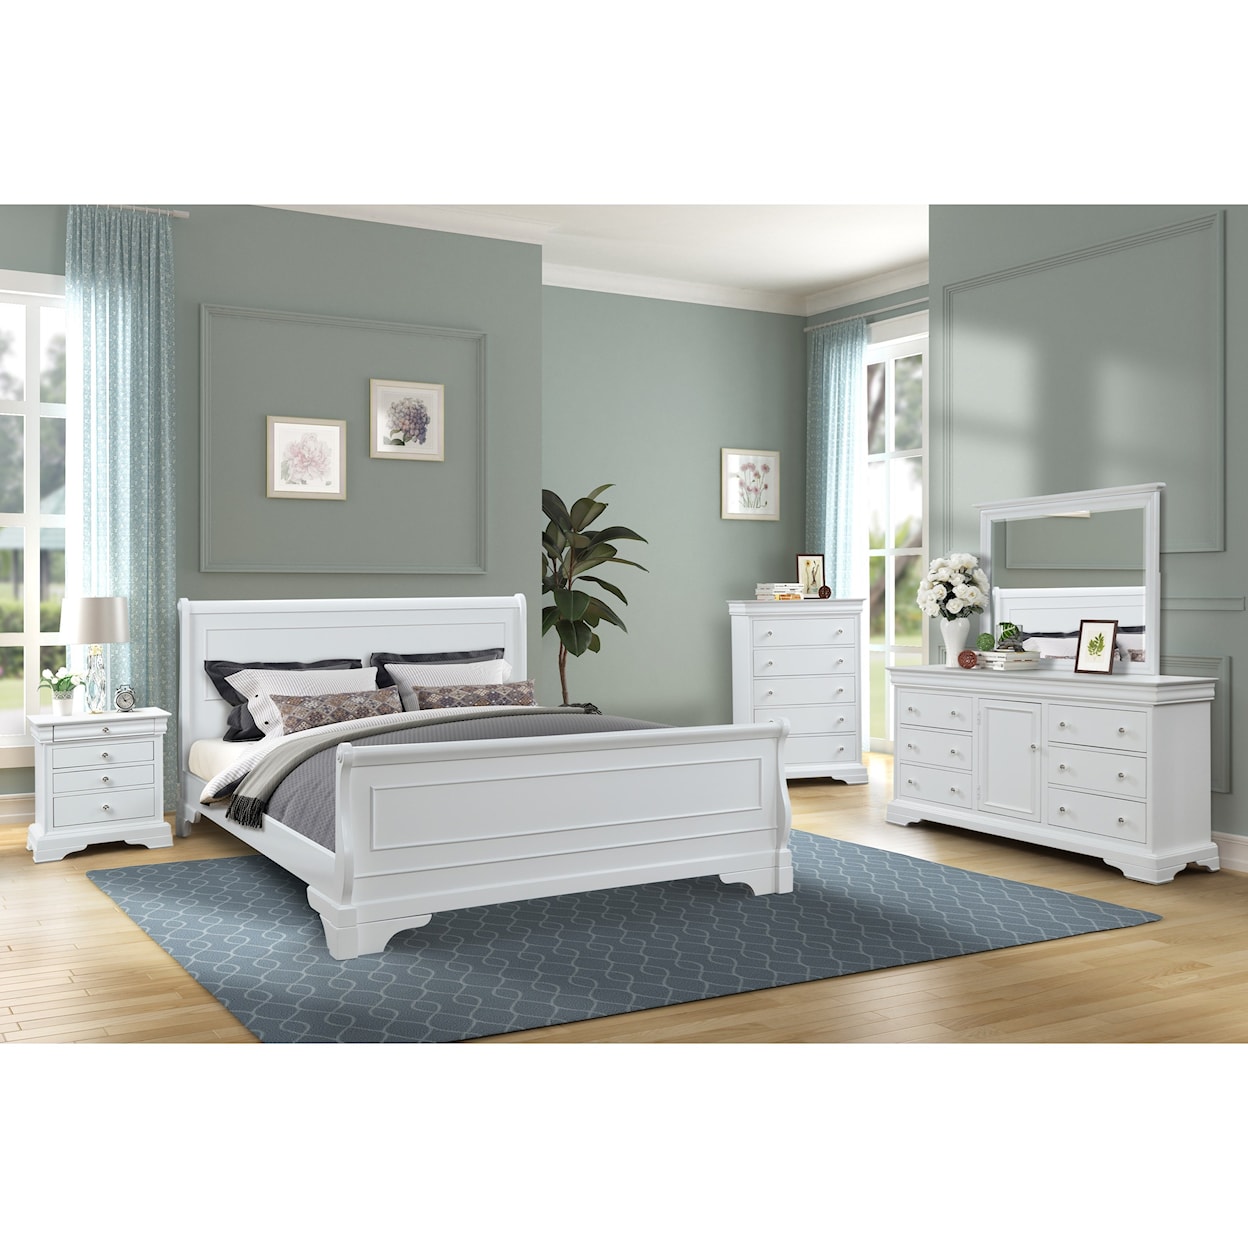 New Classic Versaille Twin Bedroom Group